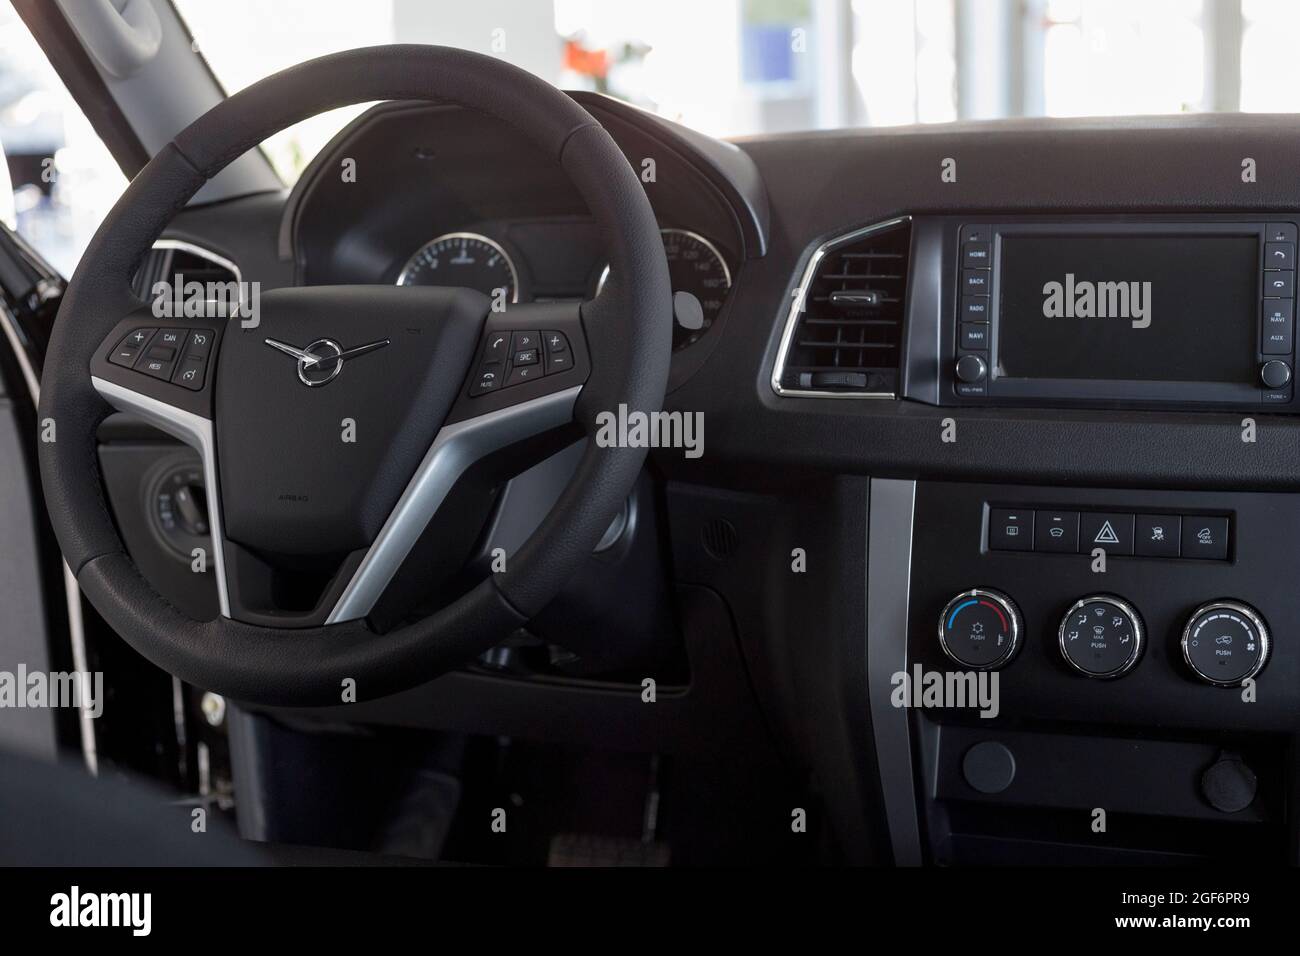 Russia, Izhevsk - August 20, 2021: UAZ showroom. Interior of new modern UAZ Patriot car with automatic transmission. Sollers automotive group. Stock Photo